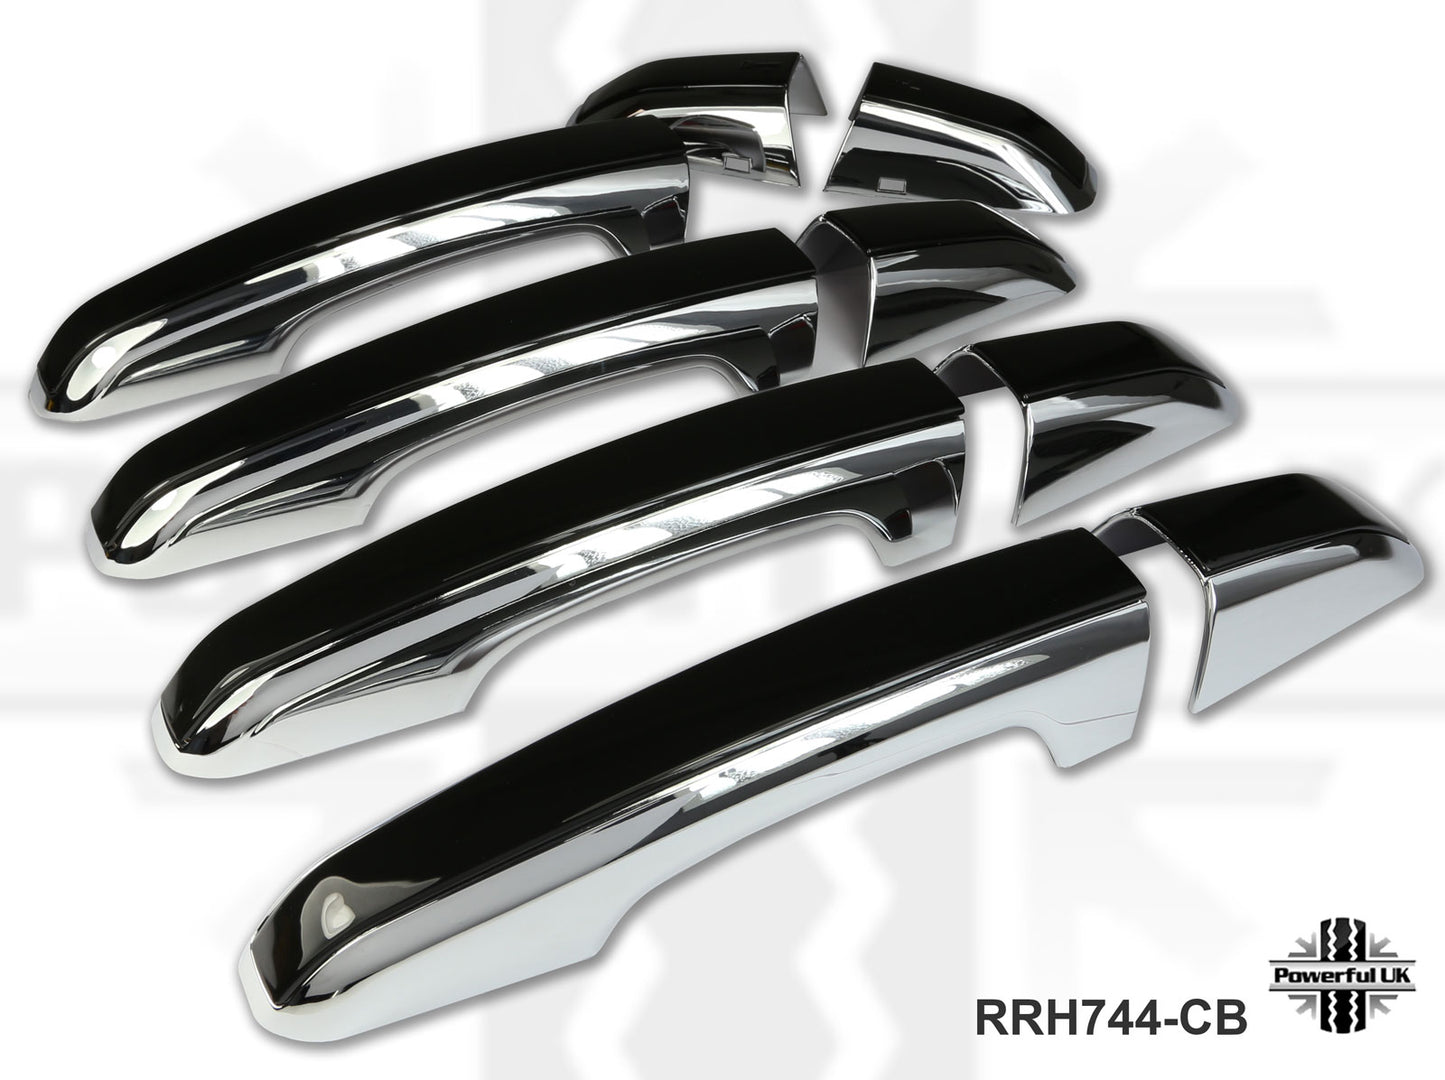 2pc "HSE Luxury Style" Door Handle Covers for Land Rover Discovery Sport - Chrome/Black